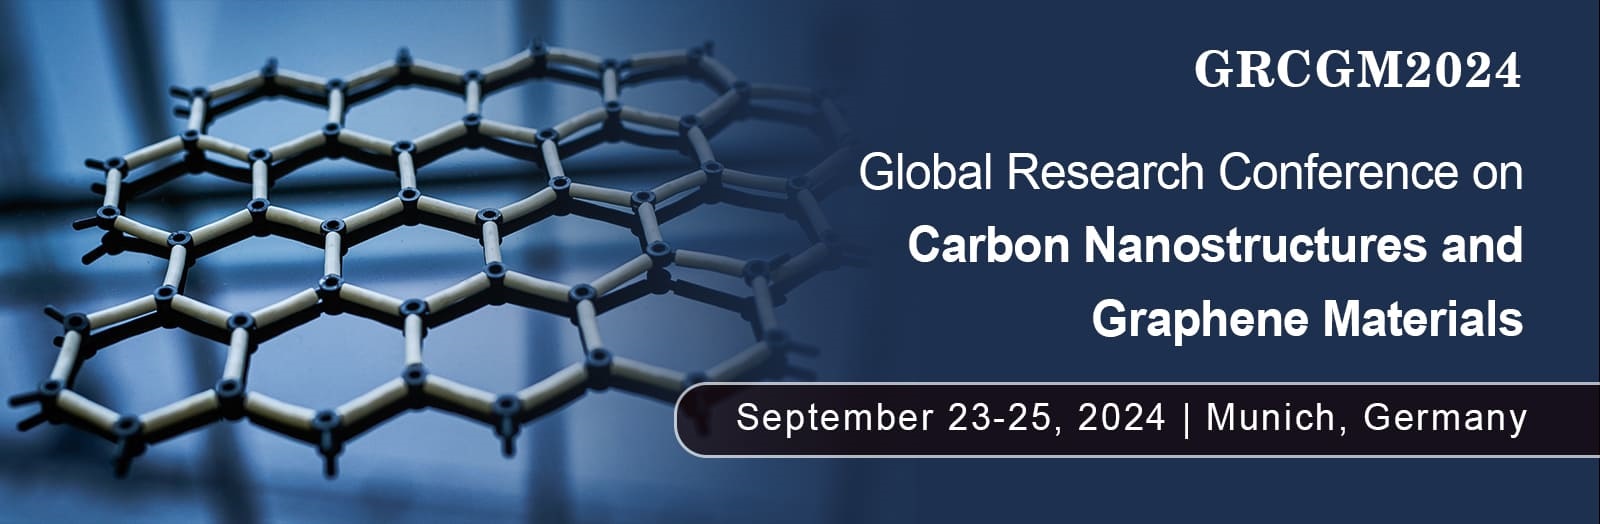 Global Research Conference on Carbon Nanostructures and Graphene Materials